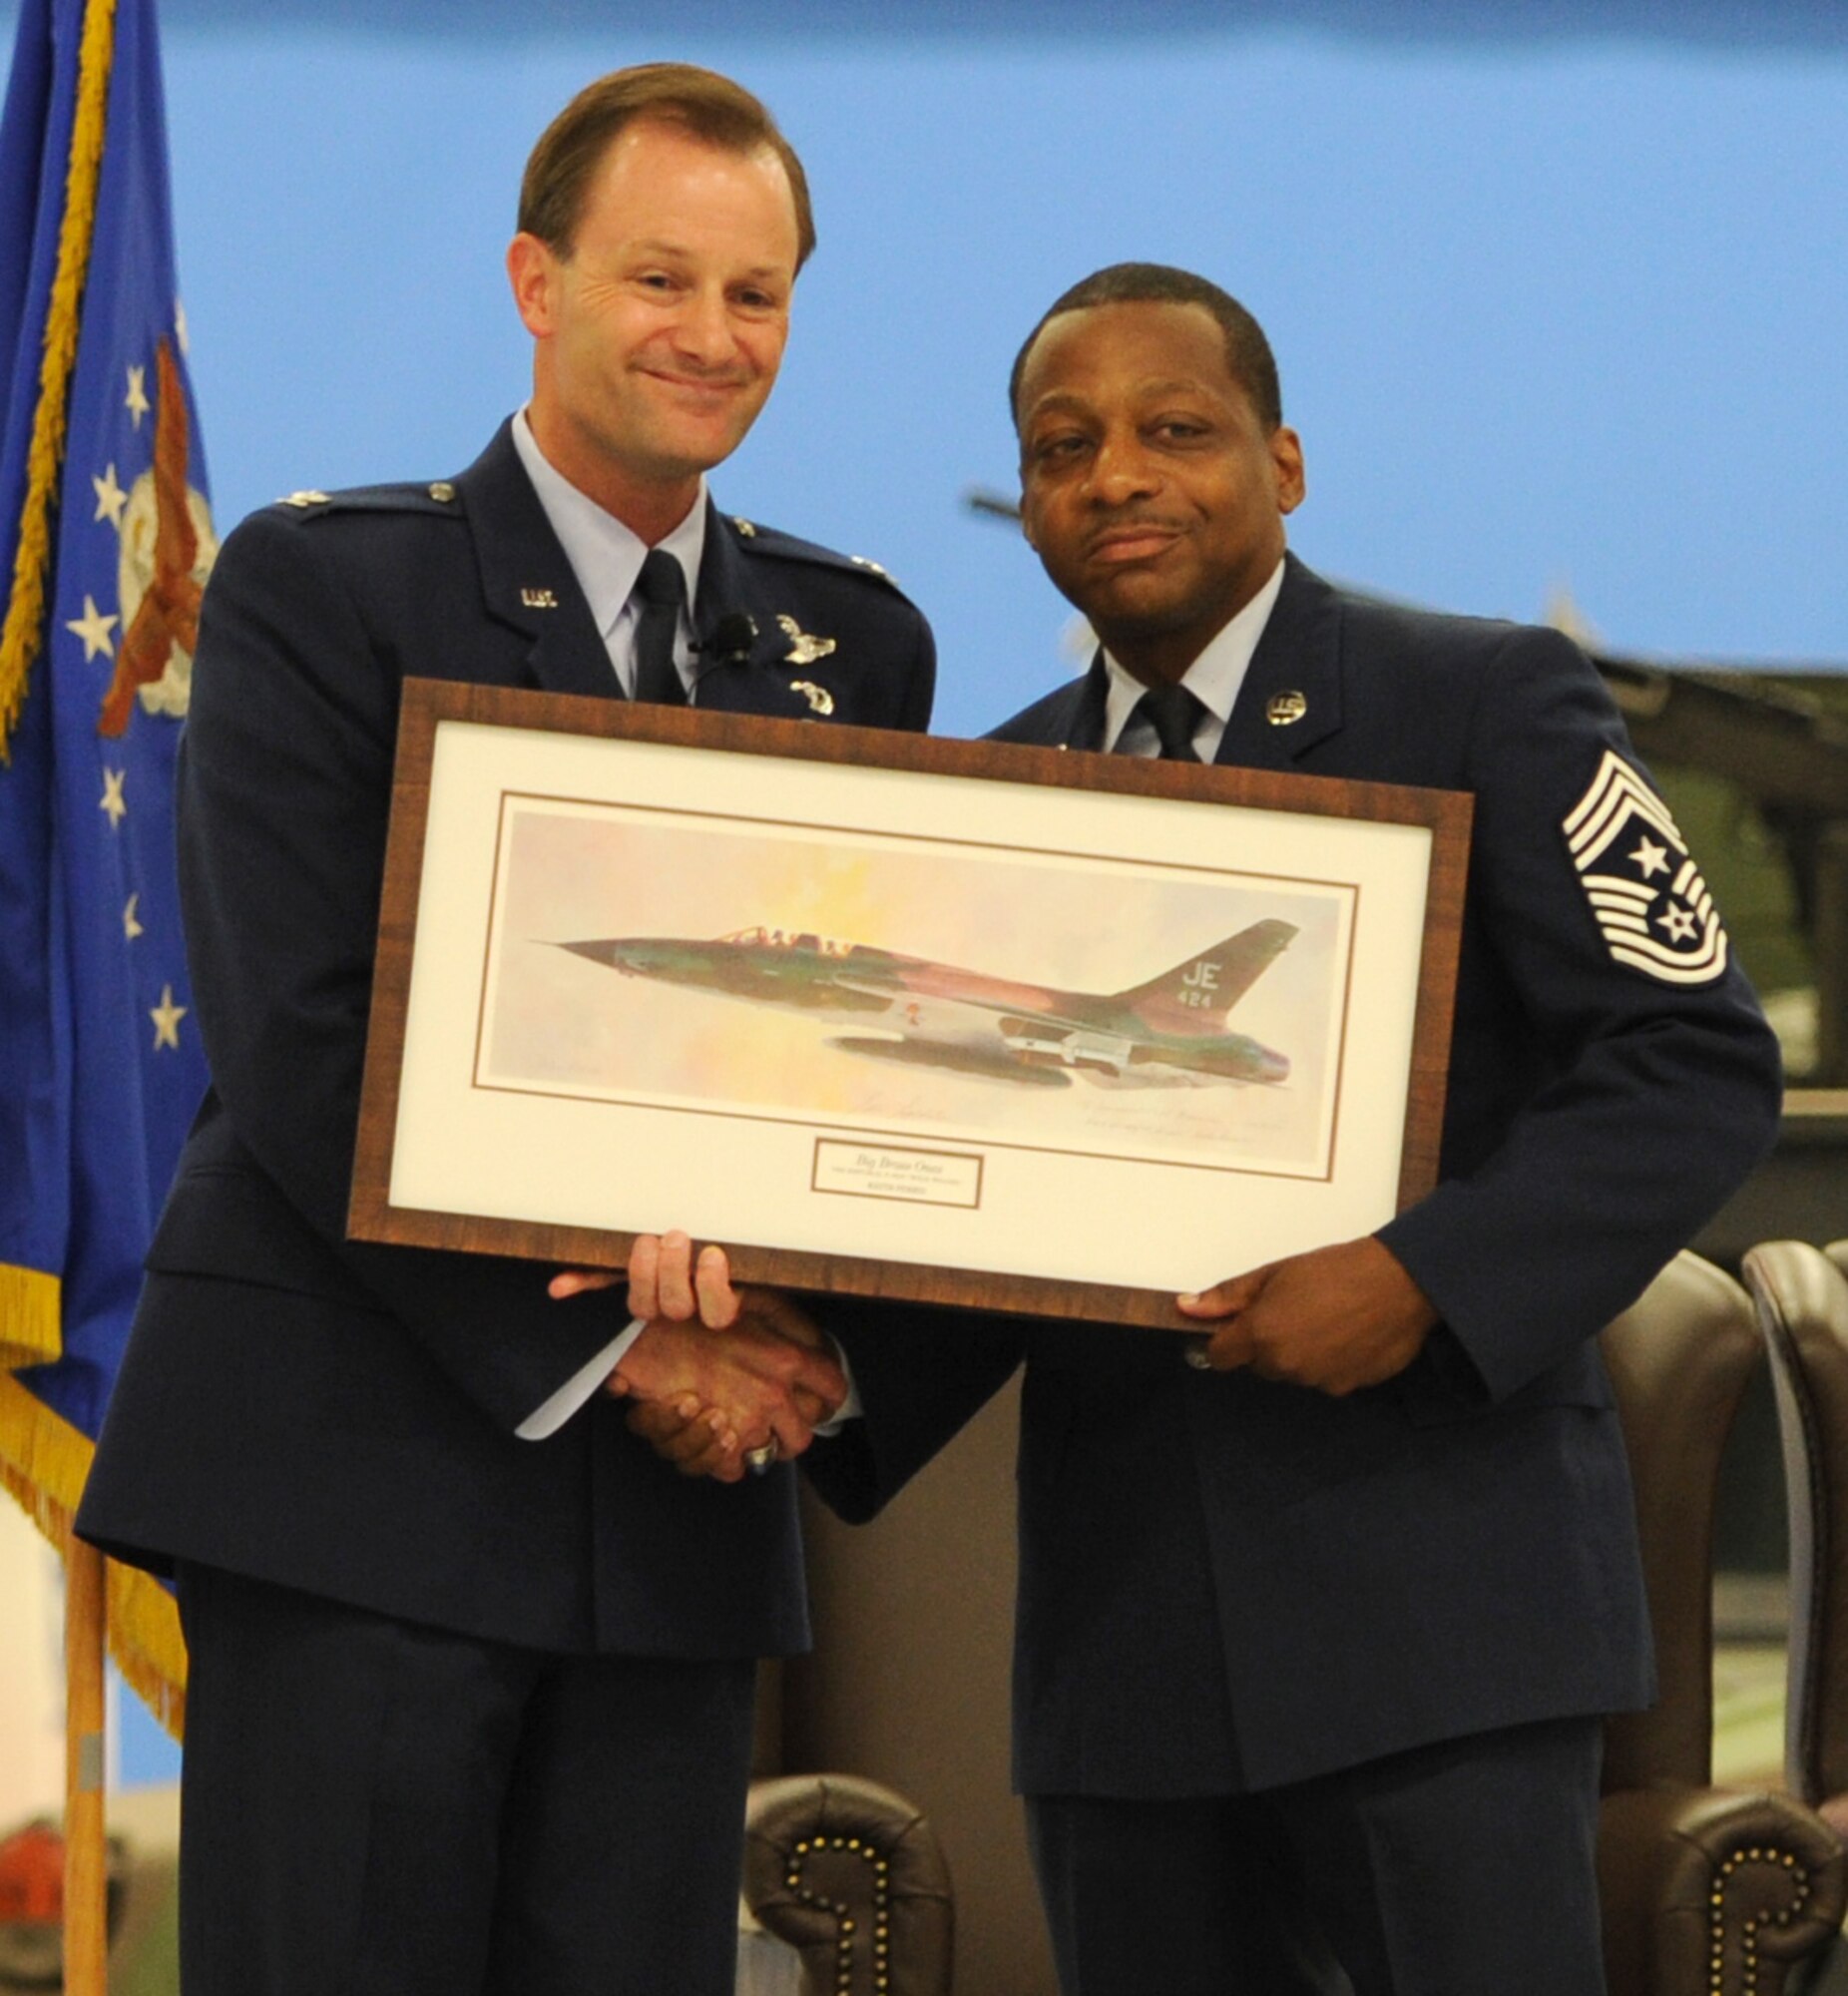 Colonel Ken Rizer, 11th Wing/Joint Base Andrews commander, presents Chief Master Sgt. Anthony Brinkley, 11th Wing/Joint Base Andrews command chief, with a painting of a "Wild Weasel" F-105 during Brinkley's retirement ceremony June 8, 2012. F-105 #62-4424 "Crown 7" was the aircraft assigned to Major John Revak, pilot, and Major Stan Goldstein, electronic warfare officer, of the 44th Tactical Fighter Squadron, 388th Tactical Fighter Wing based at Korat, Thailand. These brave and dedicated crews purposely drew fire in advance of the strike force in order to locate, intimidate or destroy enemy defenses.  Rizer compared Brinkley's dedication to doing "the right thing" despite personal or professional consequences to the mission of the "Wild Weasles."  (U.S. Air Force Photo by Staff Sgt. Torey Griffith)